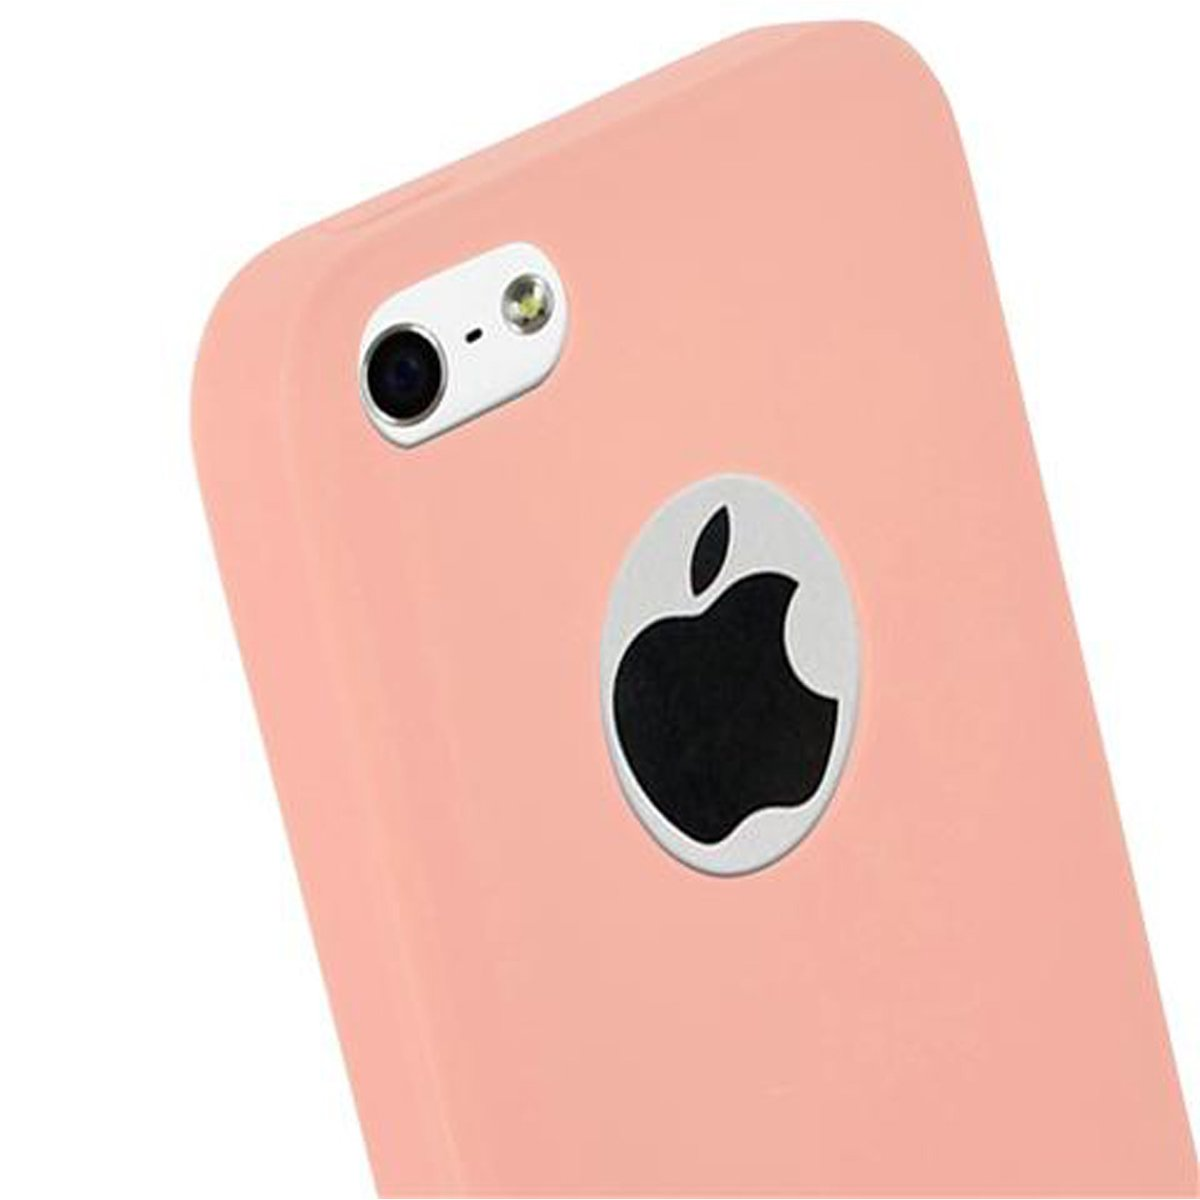 Style, / / TPU 5 5S im iPhone ROSA SE Backcover, 2016, Apple, Hülle CANDY CADORABO Candy